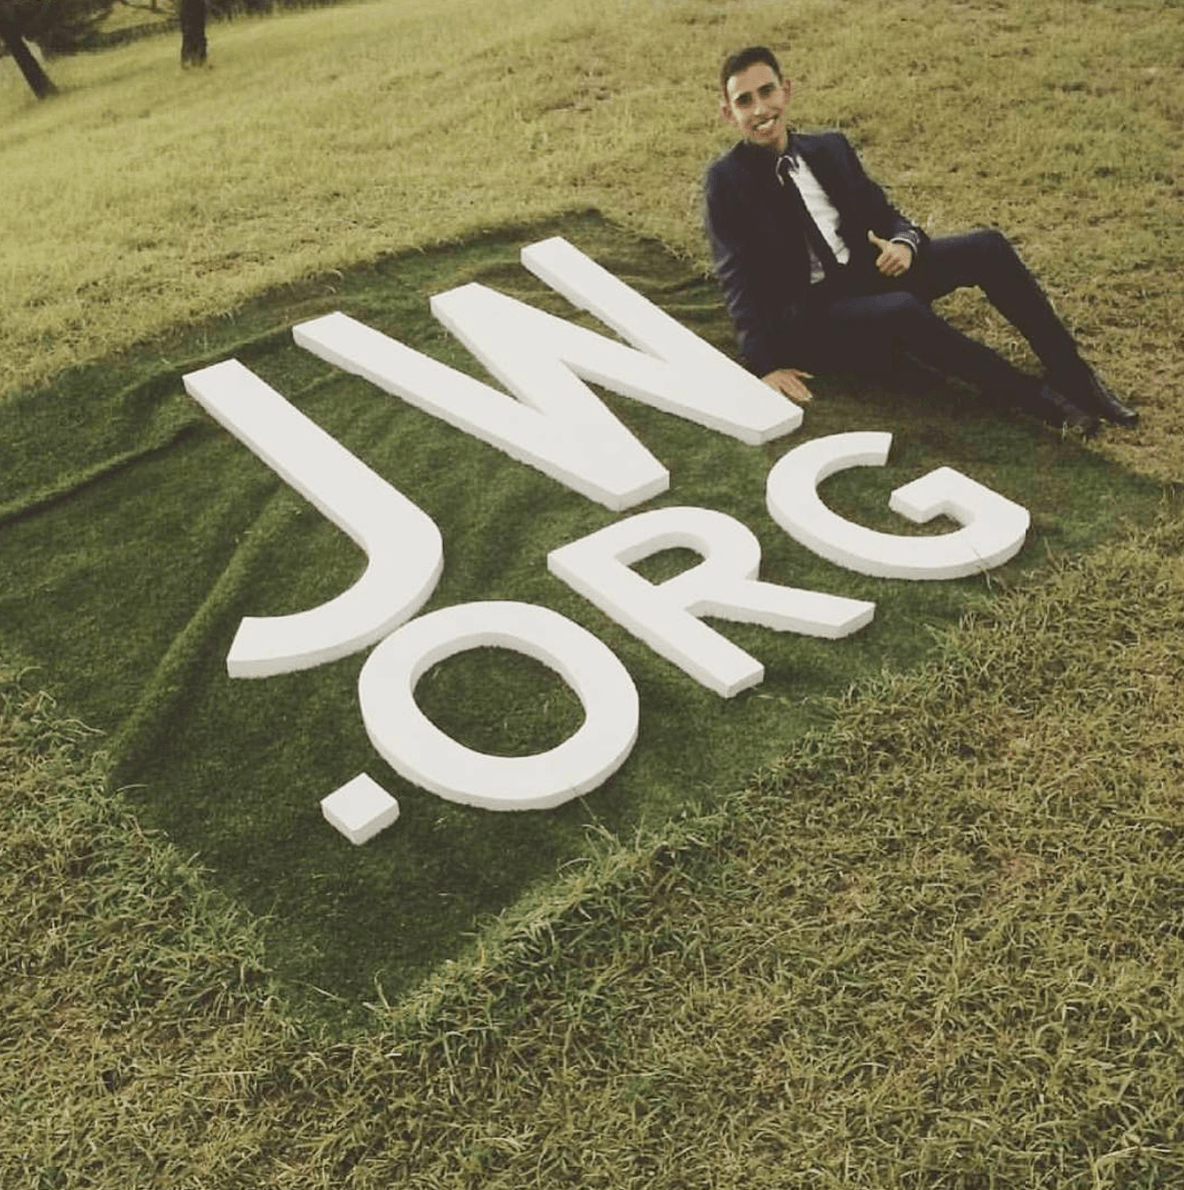 Jw.org Logo - Holy drain covers: No expense spared on new Warwick headquarters